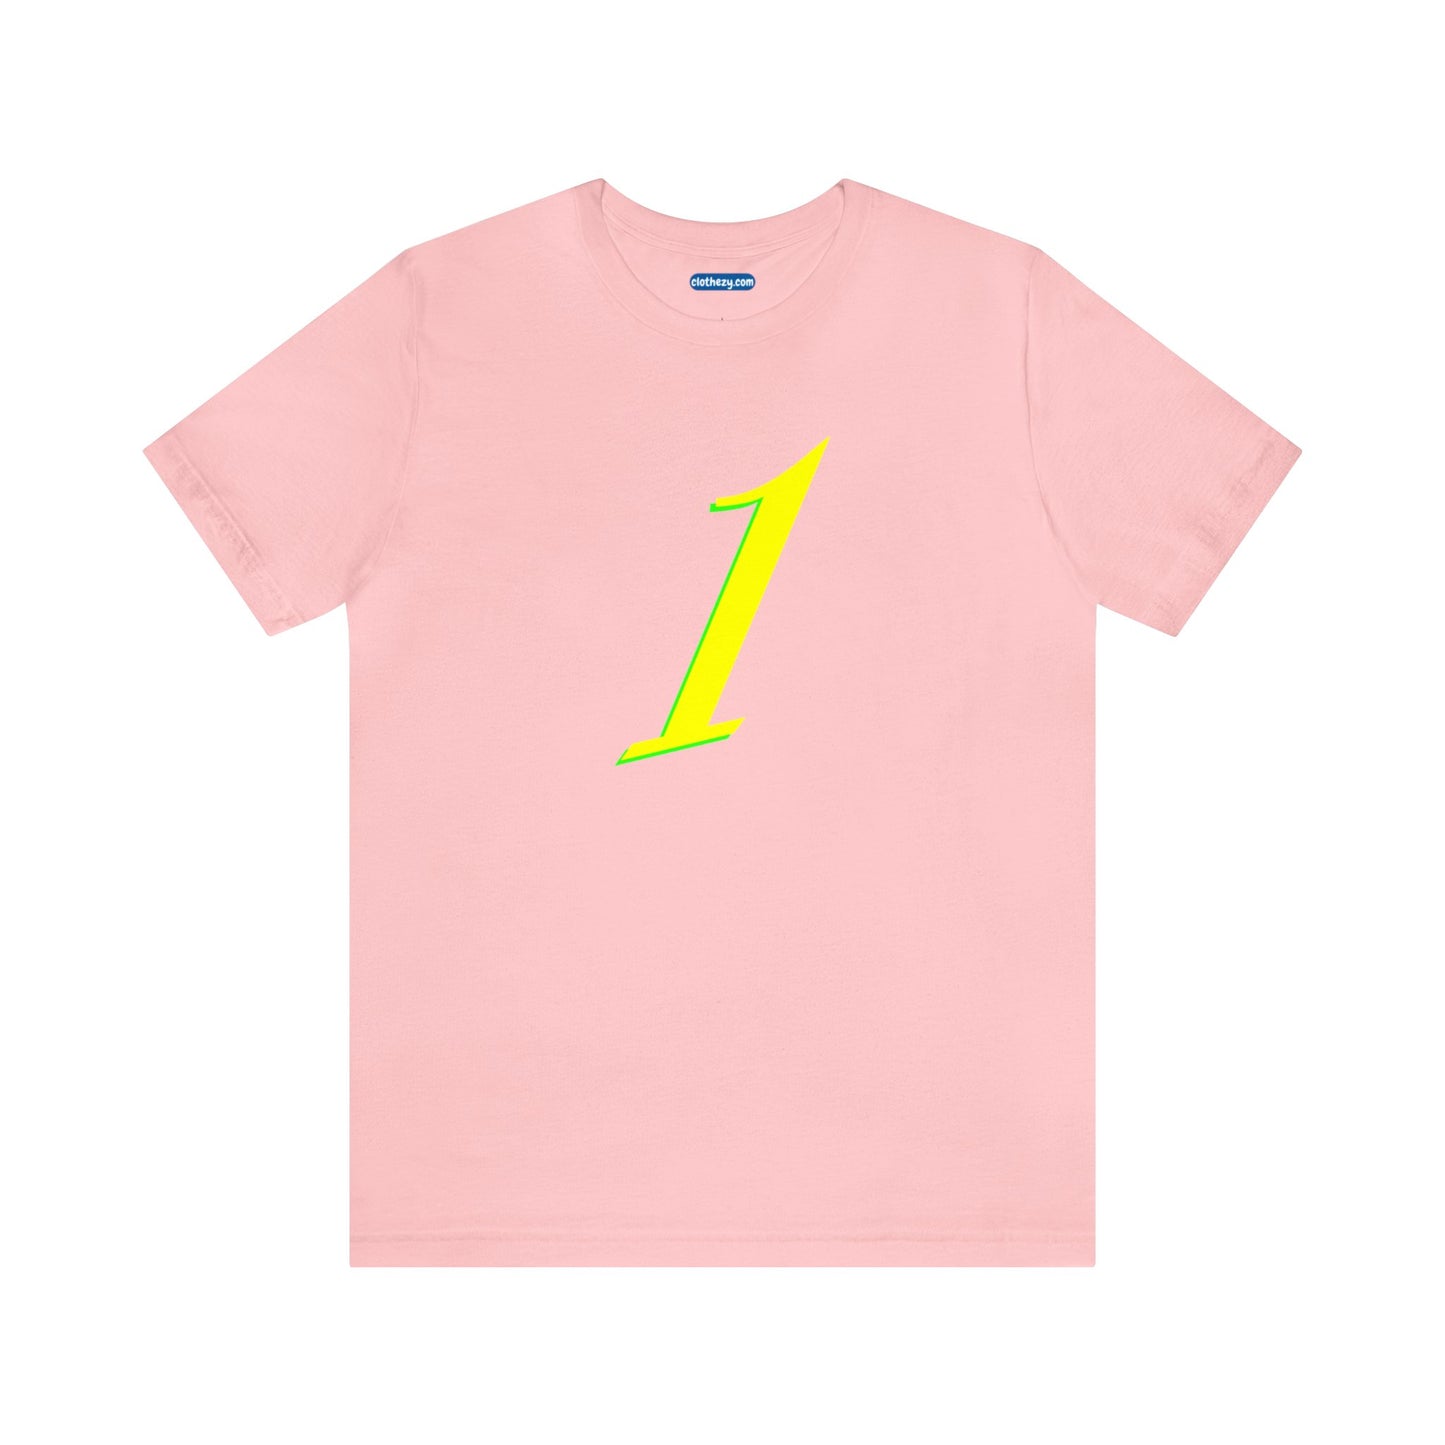 Number 1 Design - Soft Cotton Tee for birthdays and celebrations, Gift for friends and family, Multiple Options by clothezy.com in Red Size Small - Buy Now